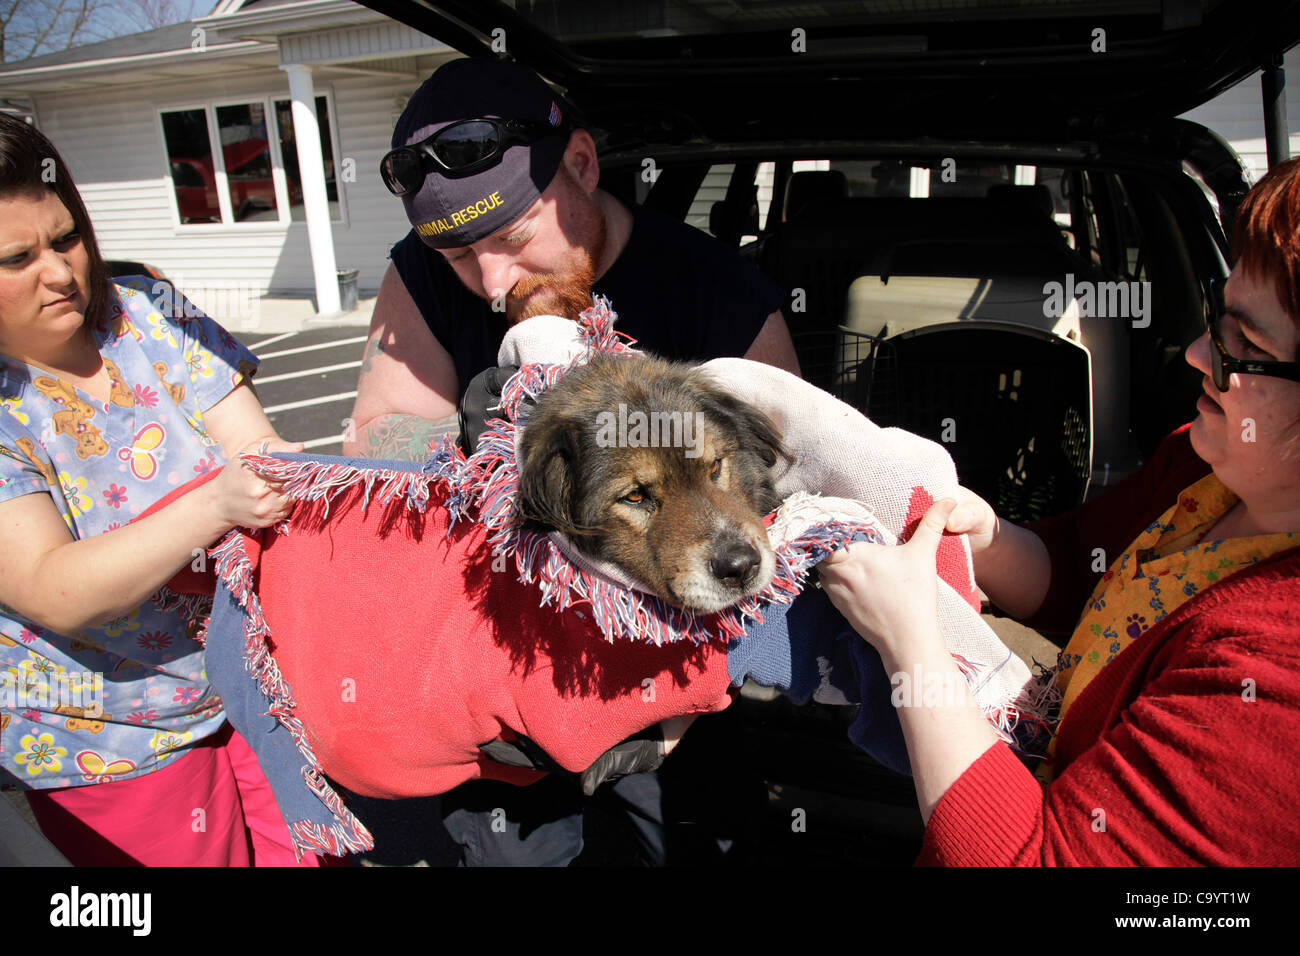 March 9, 2012 - London, Kentucky, USA - Rowdy Shaw, a senior field responder with The Humane Society of the United States, helps employees of the London Veterinary Clinic move an injured dog into a vehicle in the aftermath of tornados that tore through East Bernstadt and areas around London, Ky. Thi Stock Photo